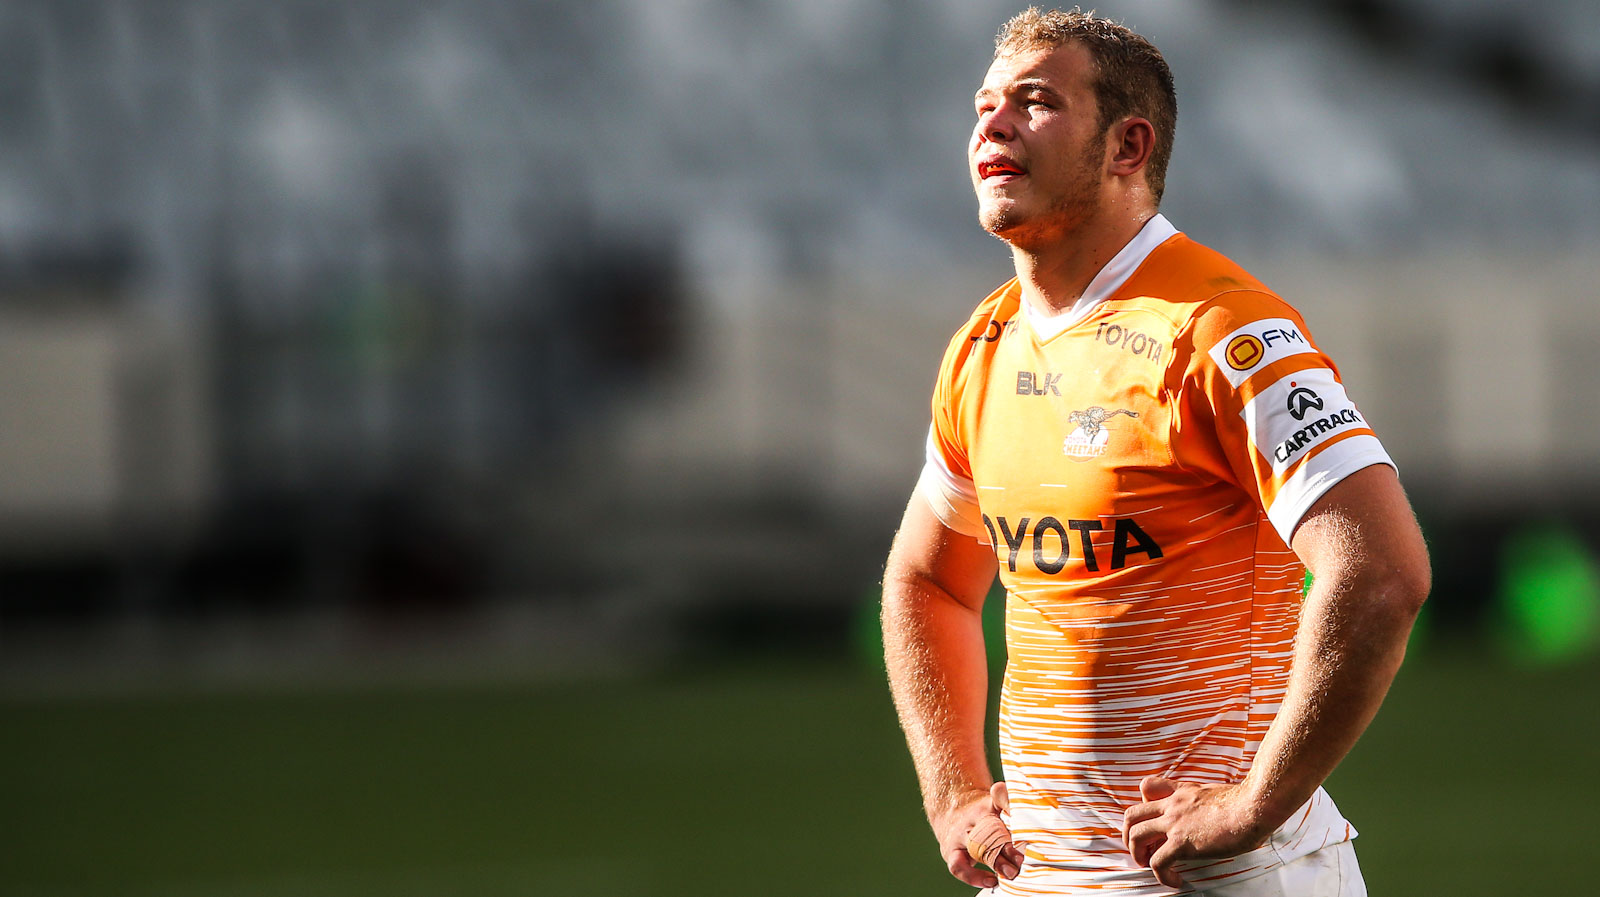 Dreaming big - George Cronje made his Carling Currie Cup debut at only 19 years of age.